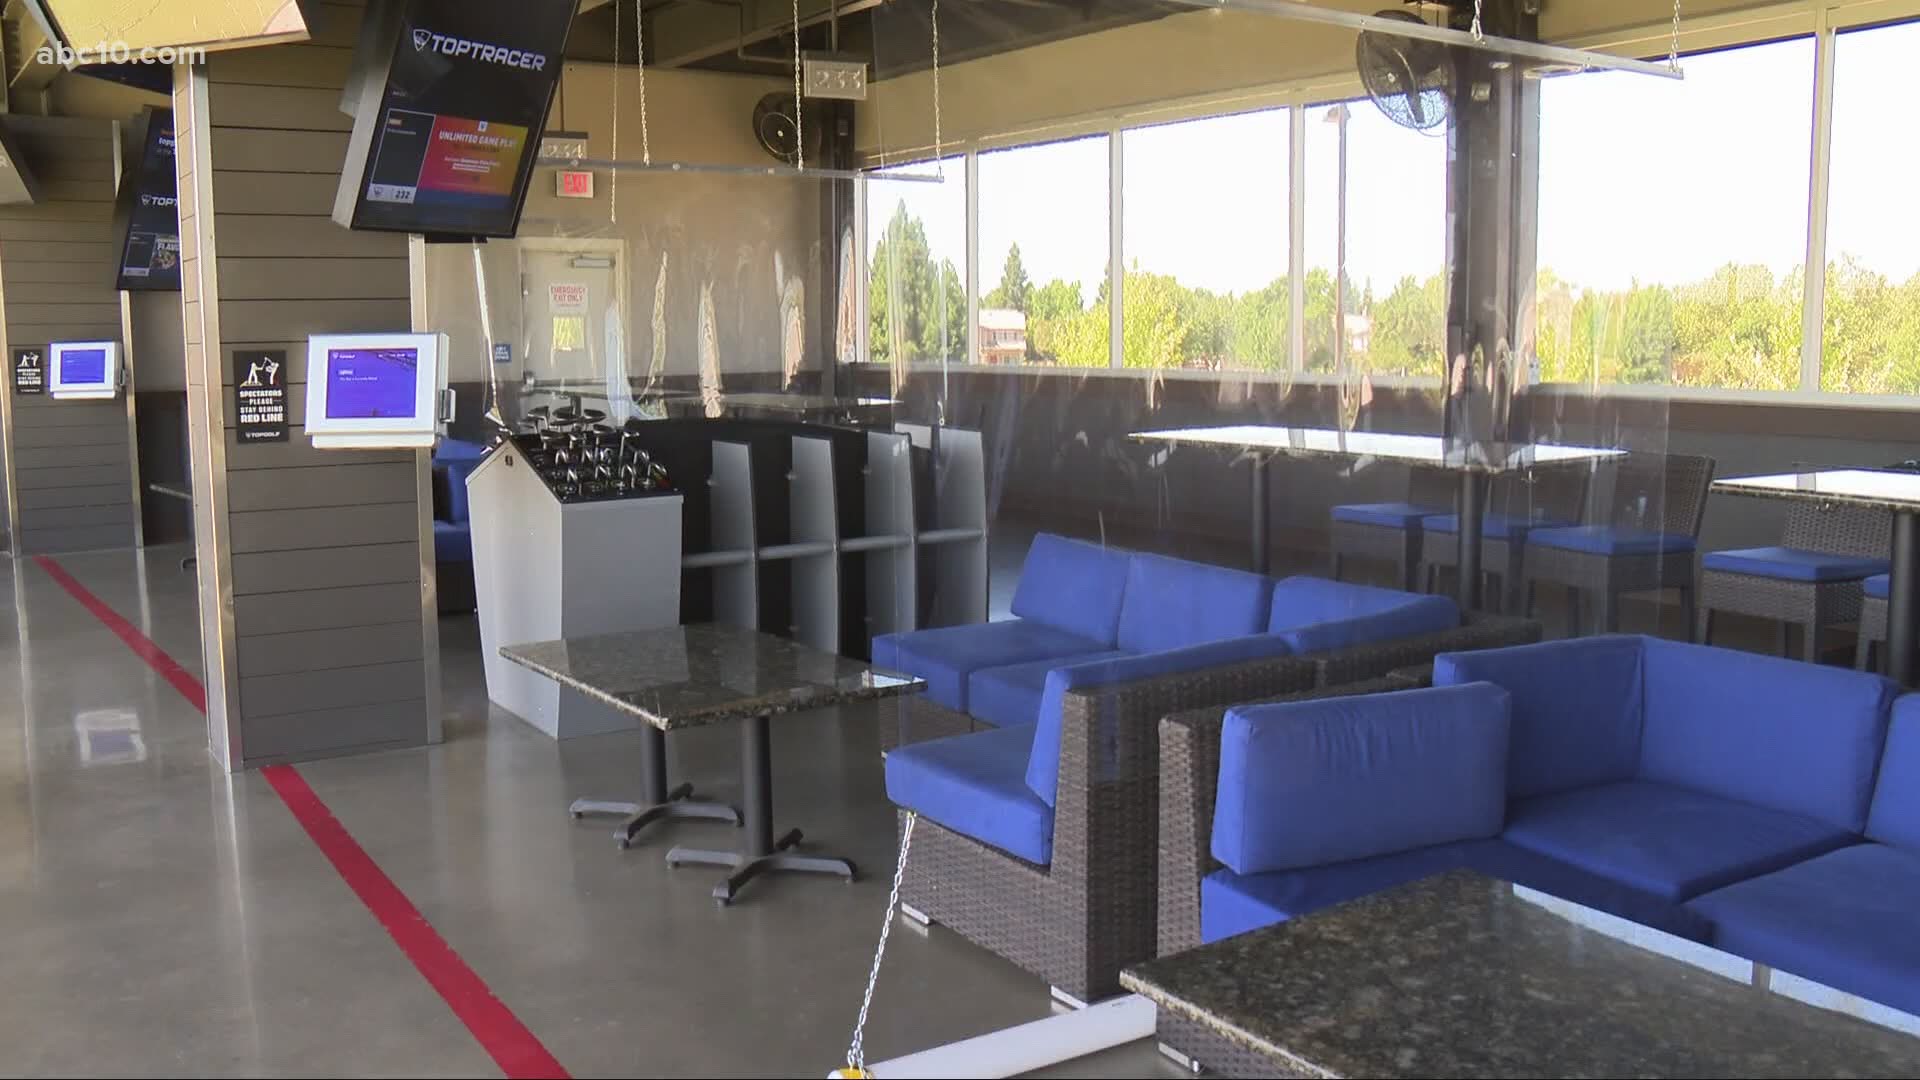 Recreational business like Topgolf and Smart Axe are reopening with changes in place to encourage social distancing.